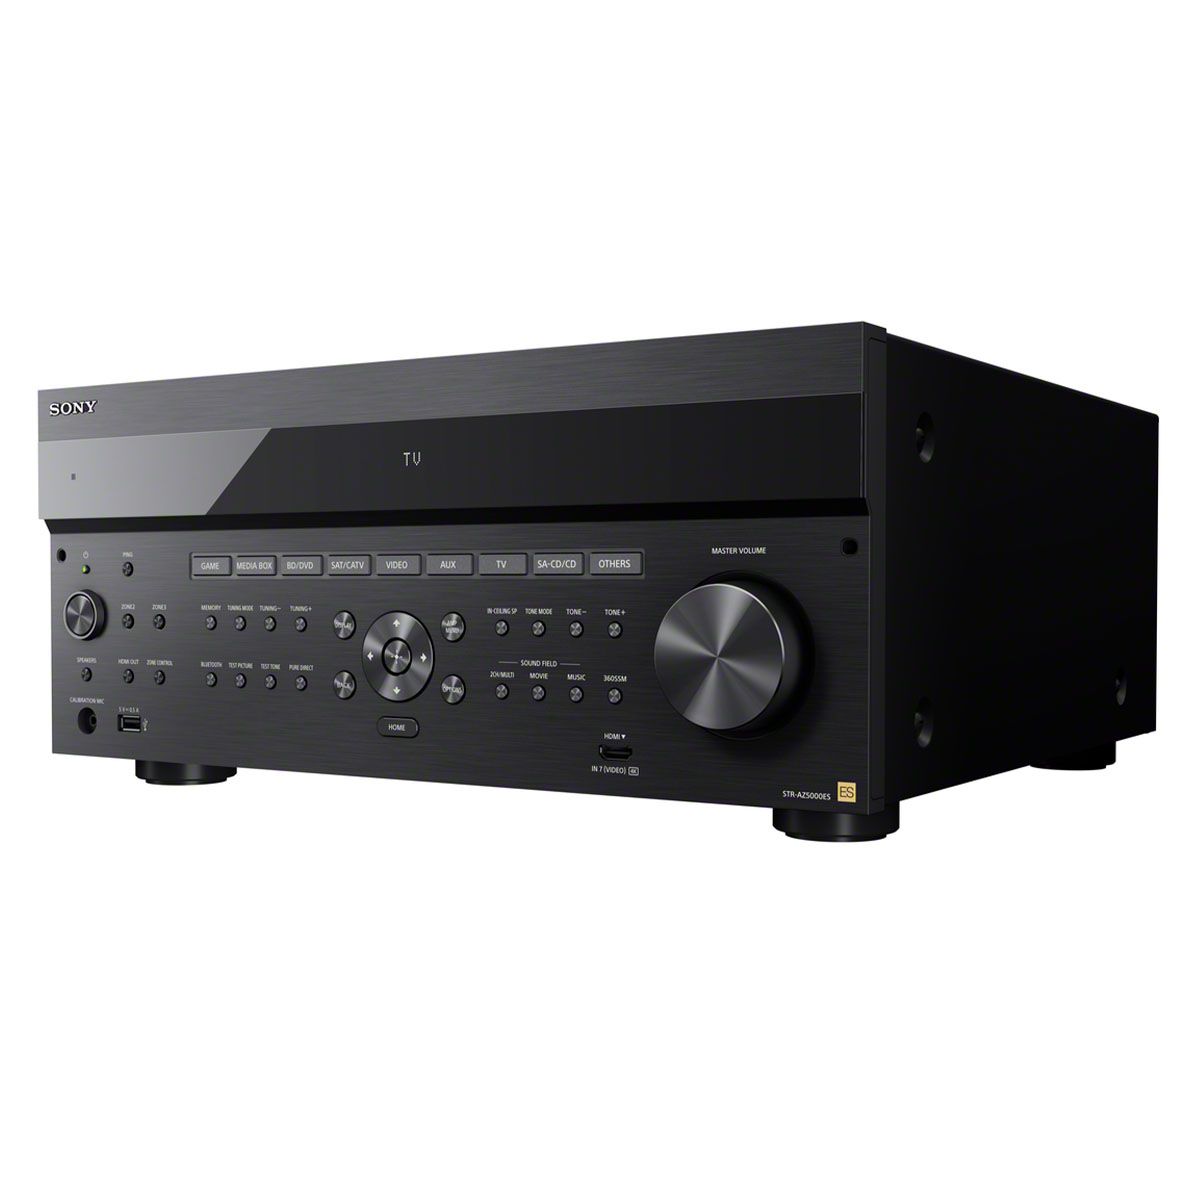 Sony STR-AZ5000ES Home Theater Receiver - angled front view without cover